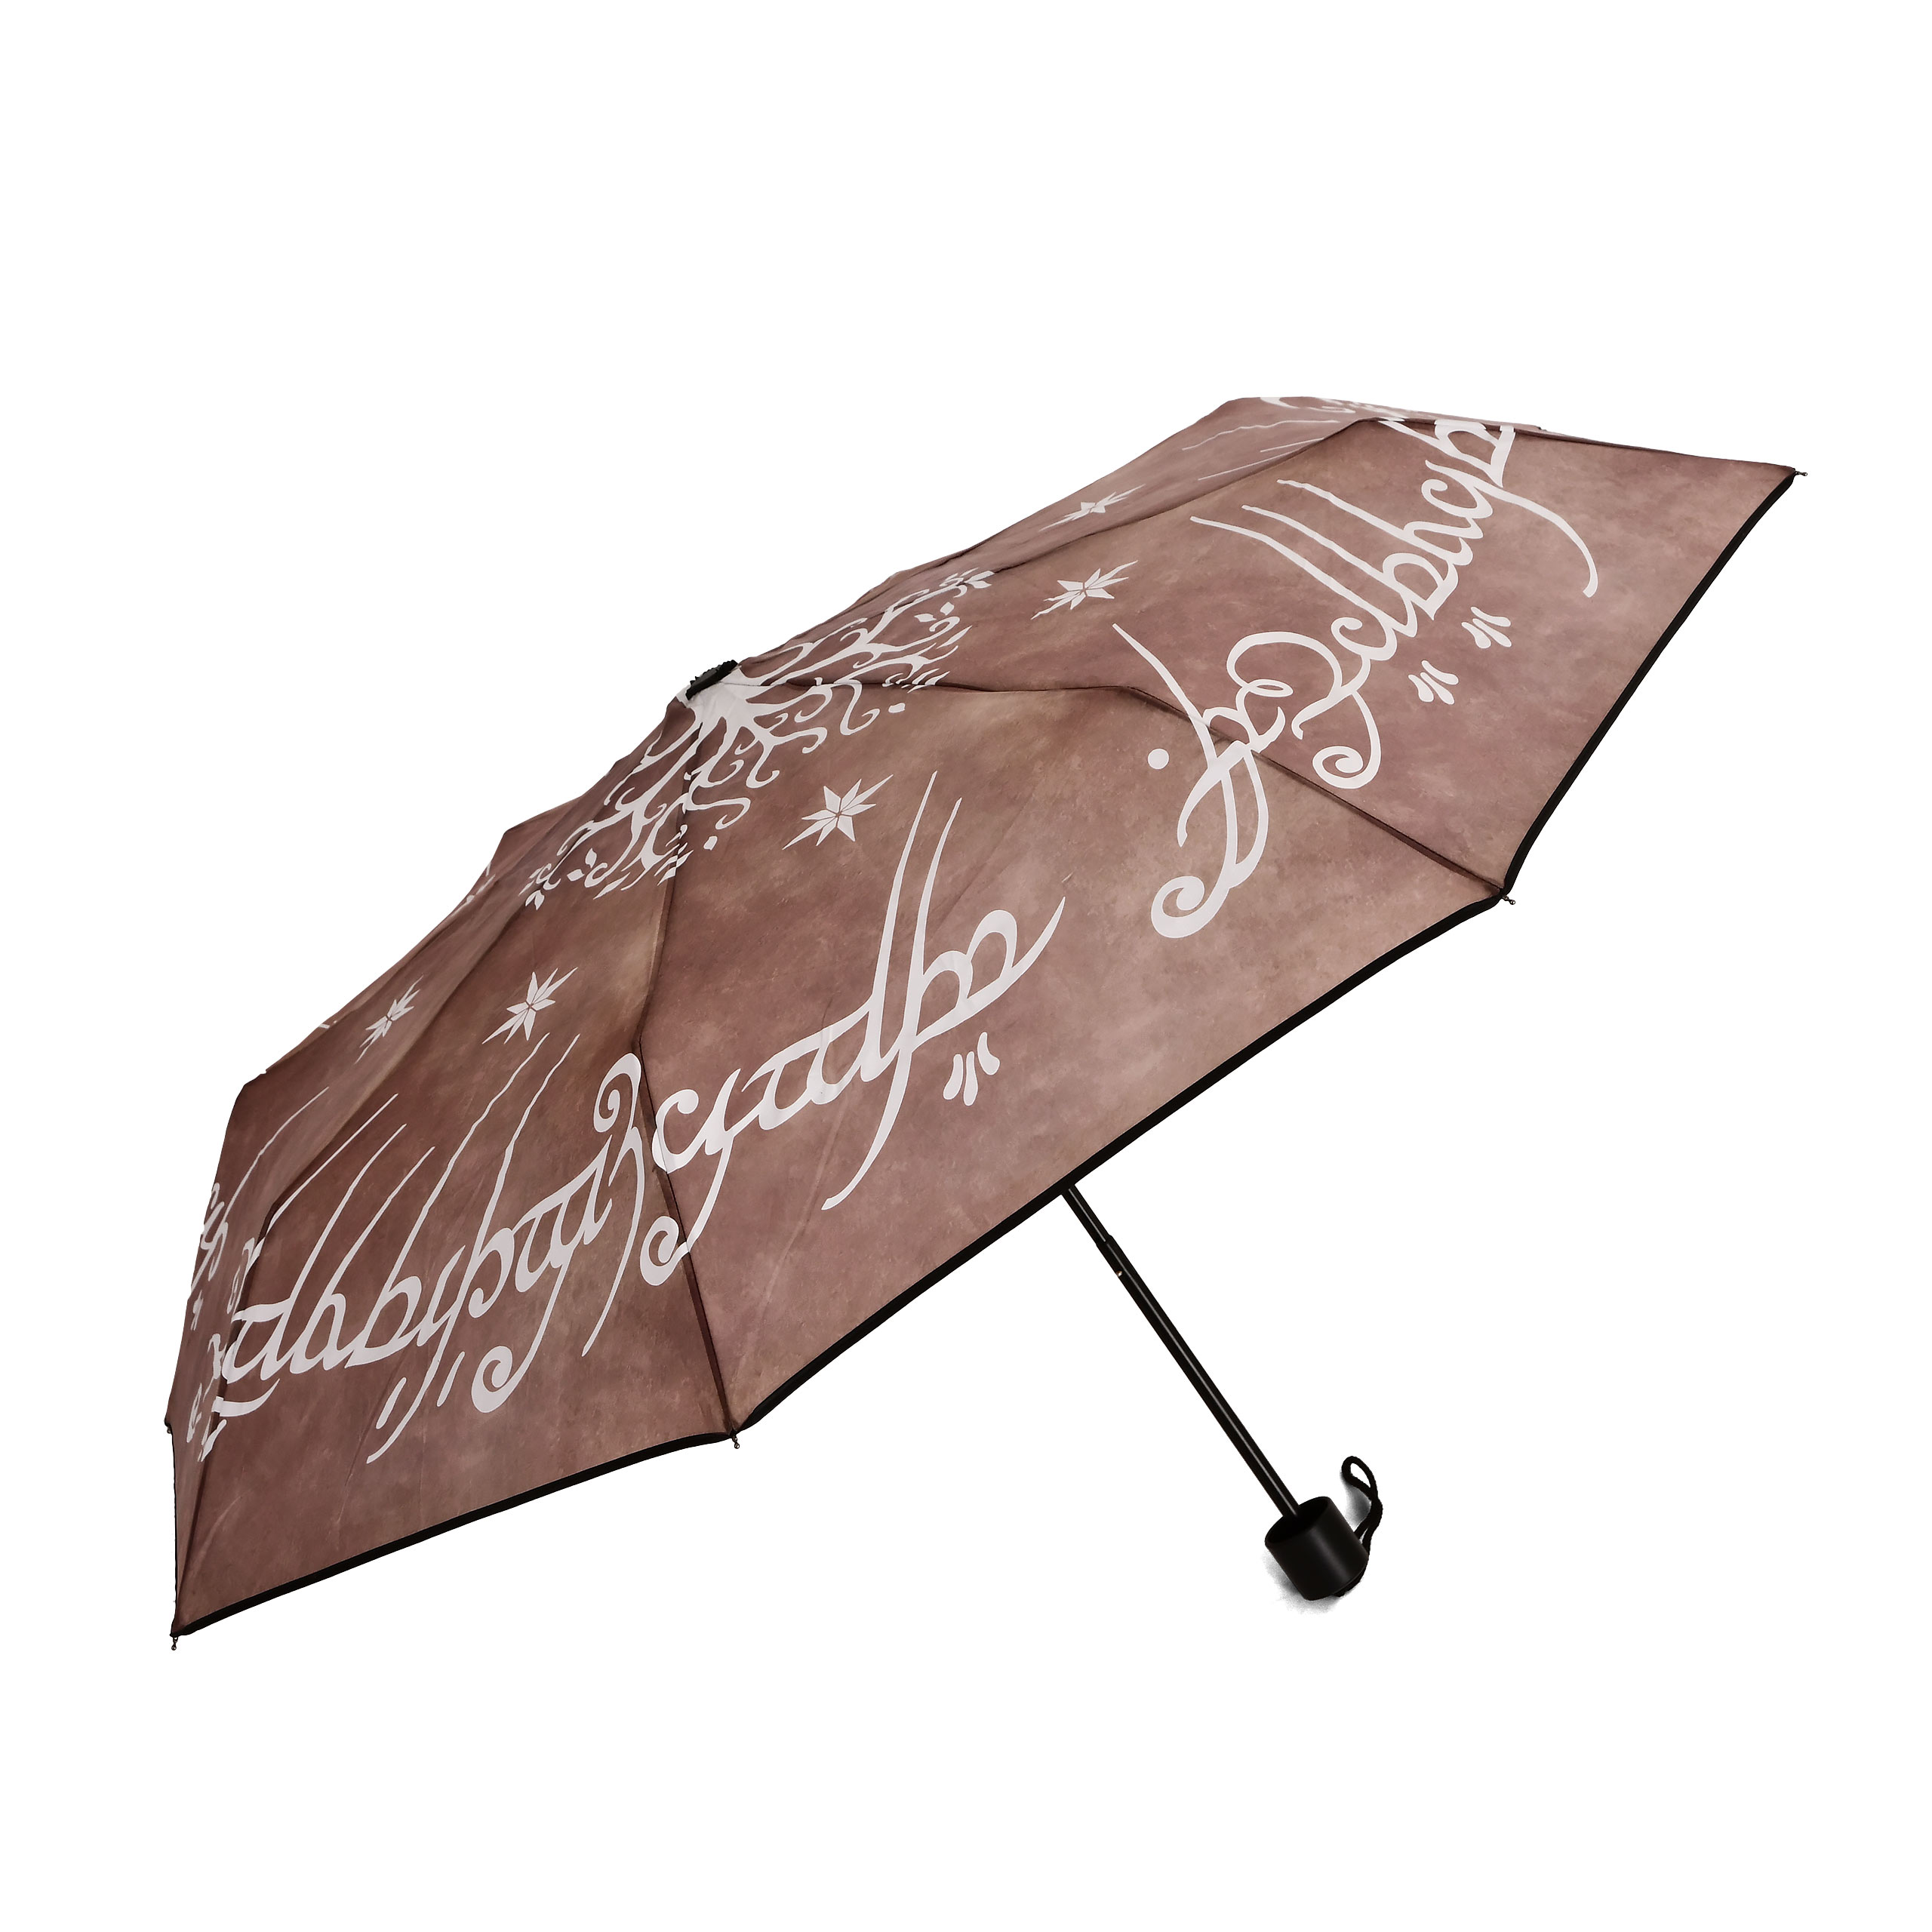 Lord of the Rings - The One Ring Umbrella with Aqua Effect